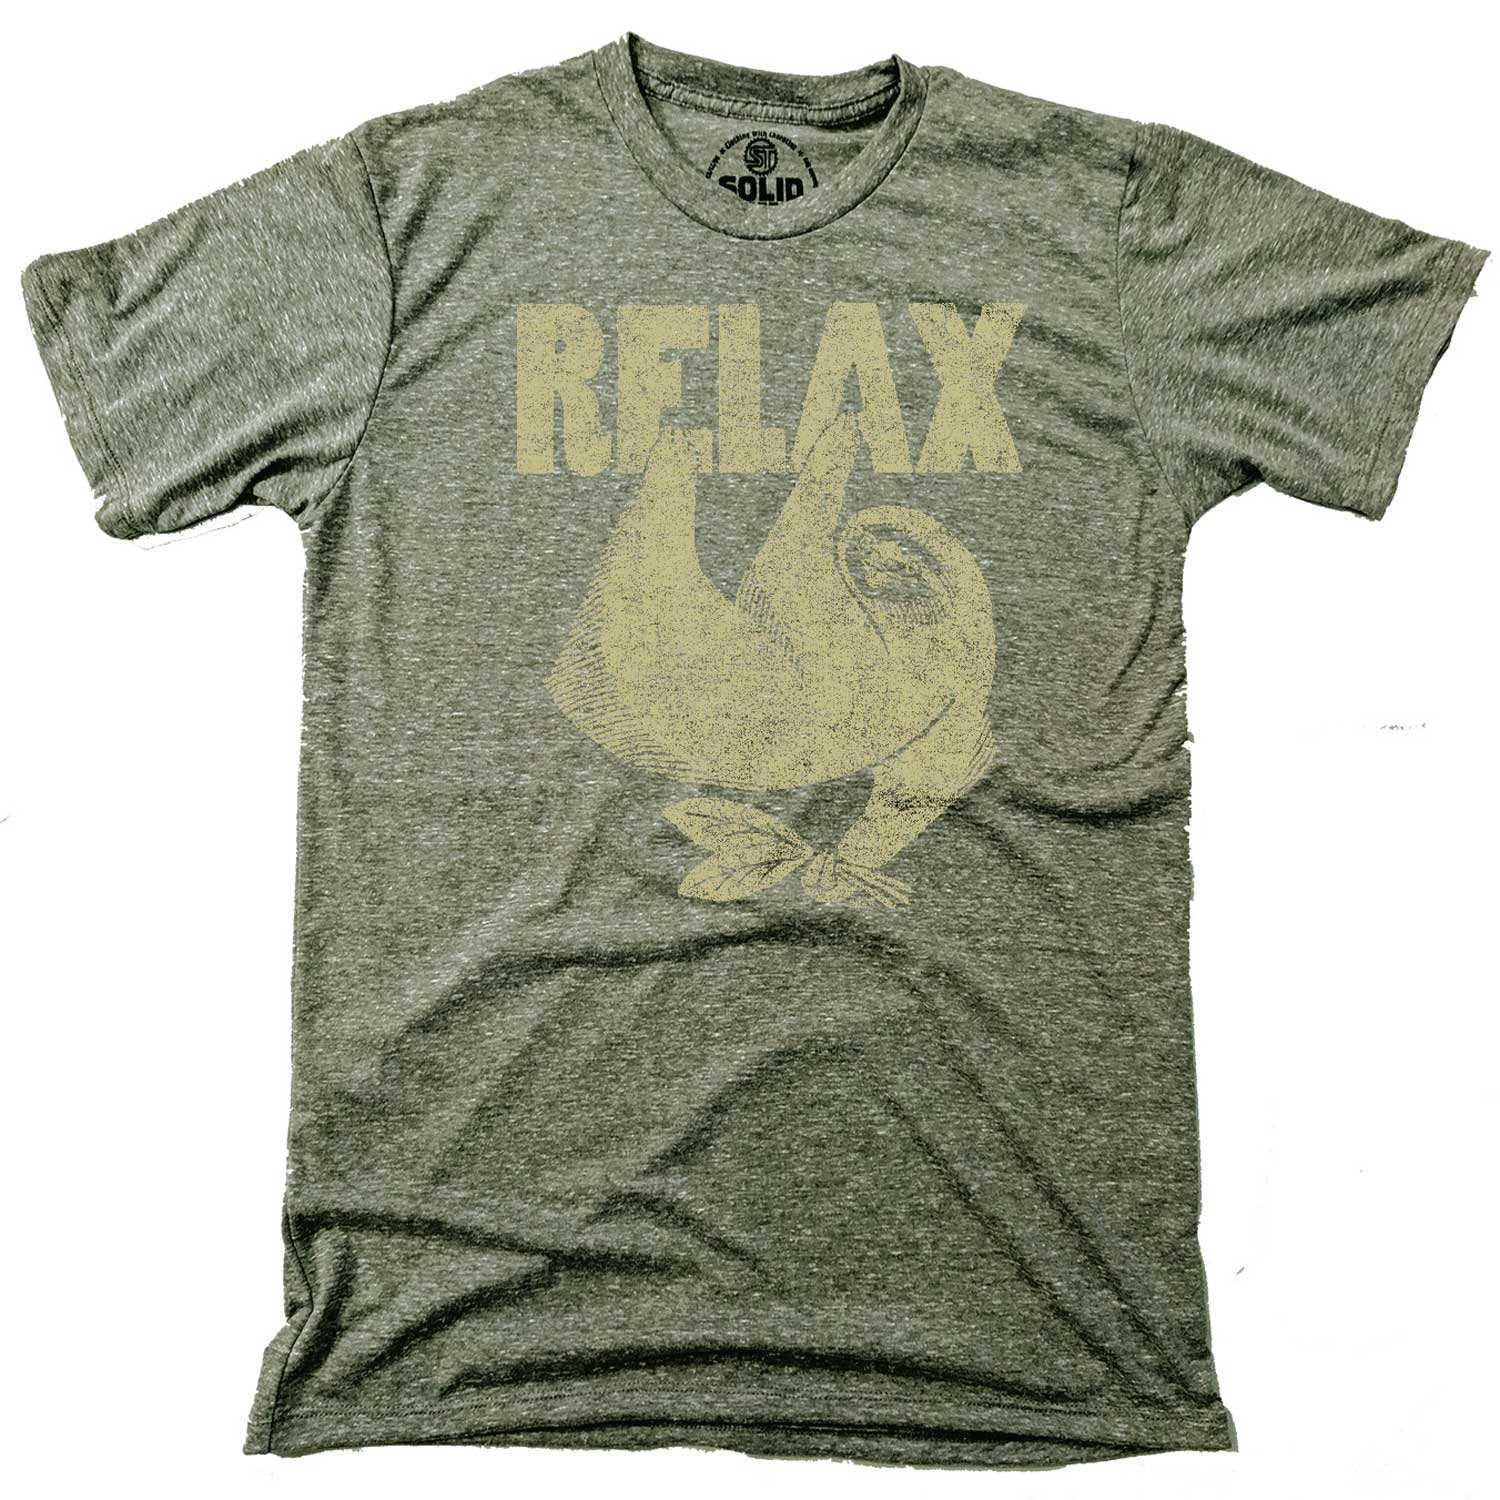 Relax Vintage T-Shirt | SOLID THREADS 